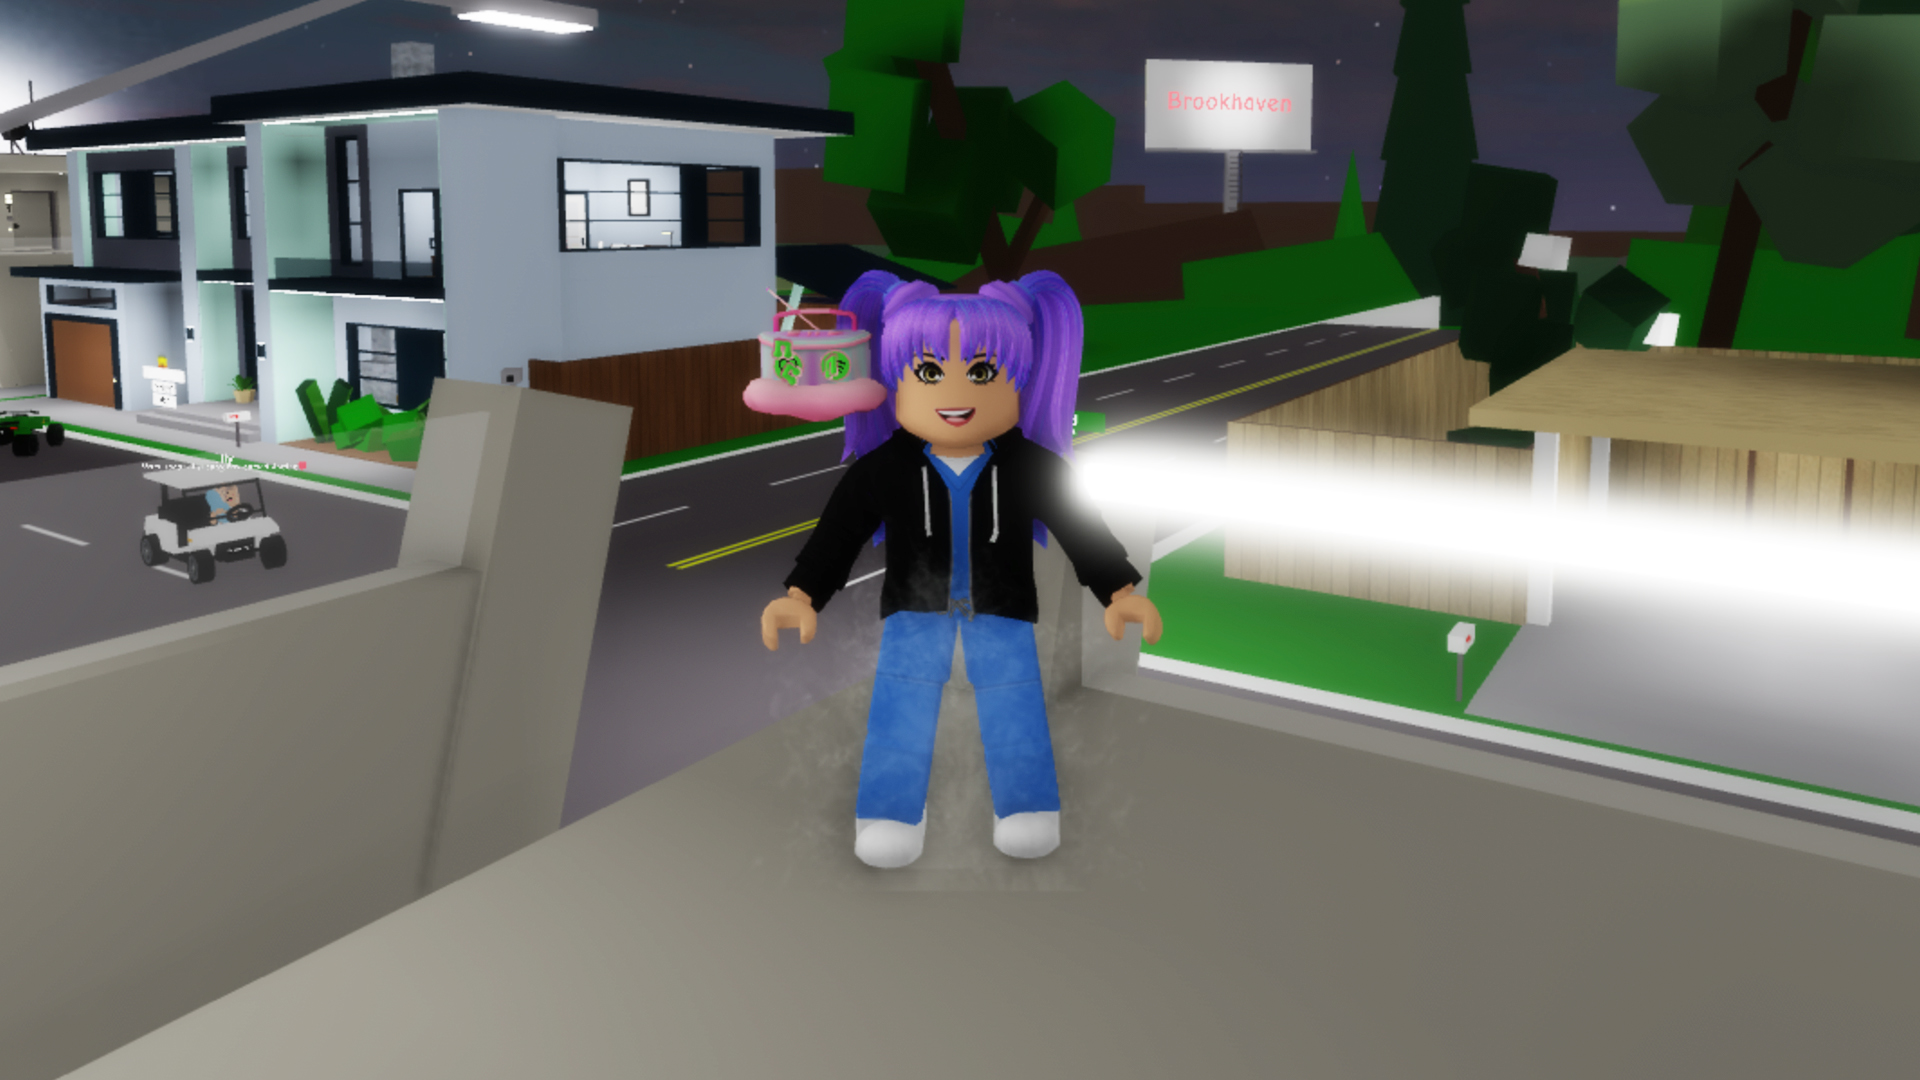 Roblox’s metaverse is overhyped, a new report suggests